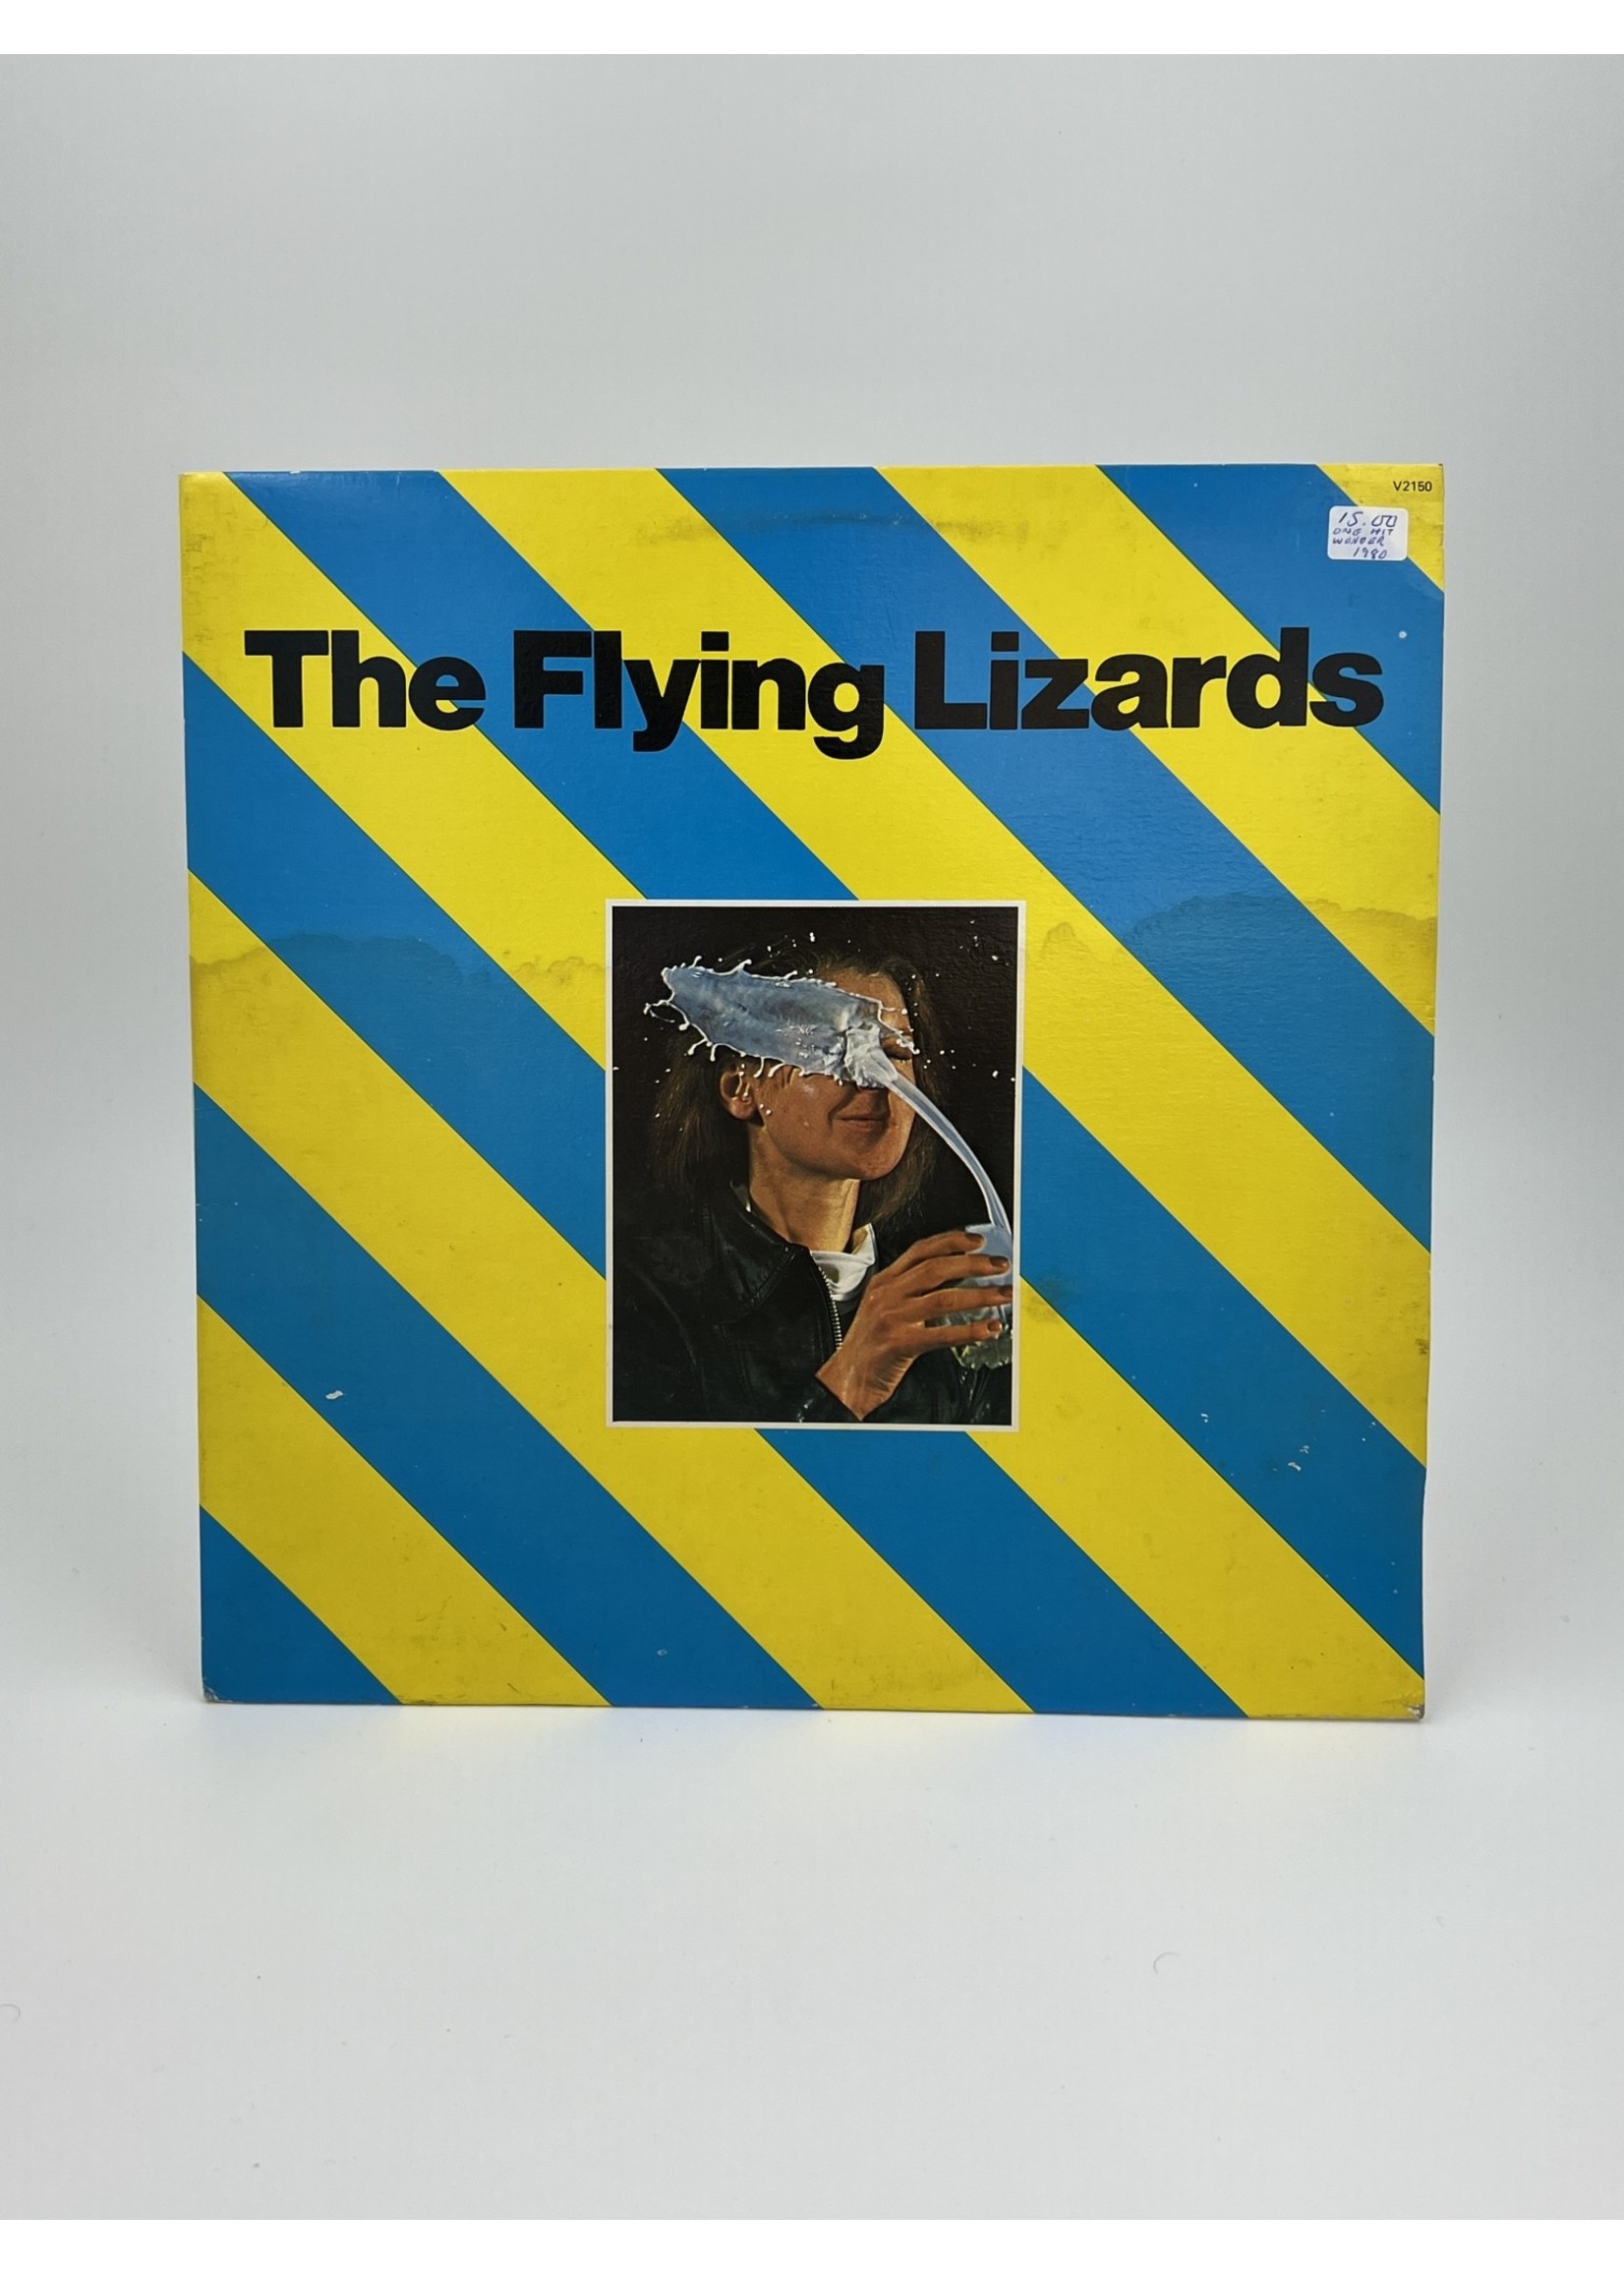 LP The Flying LIzards LP Record